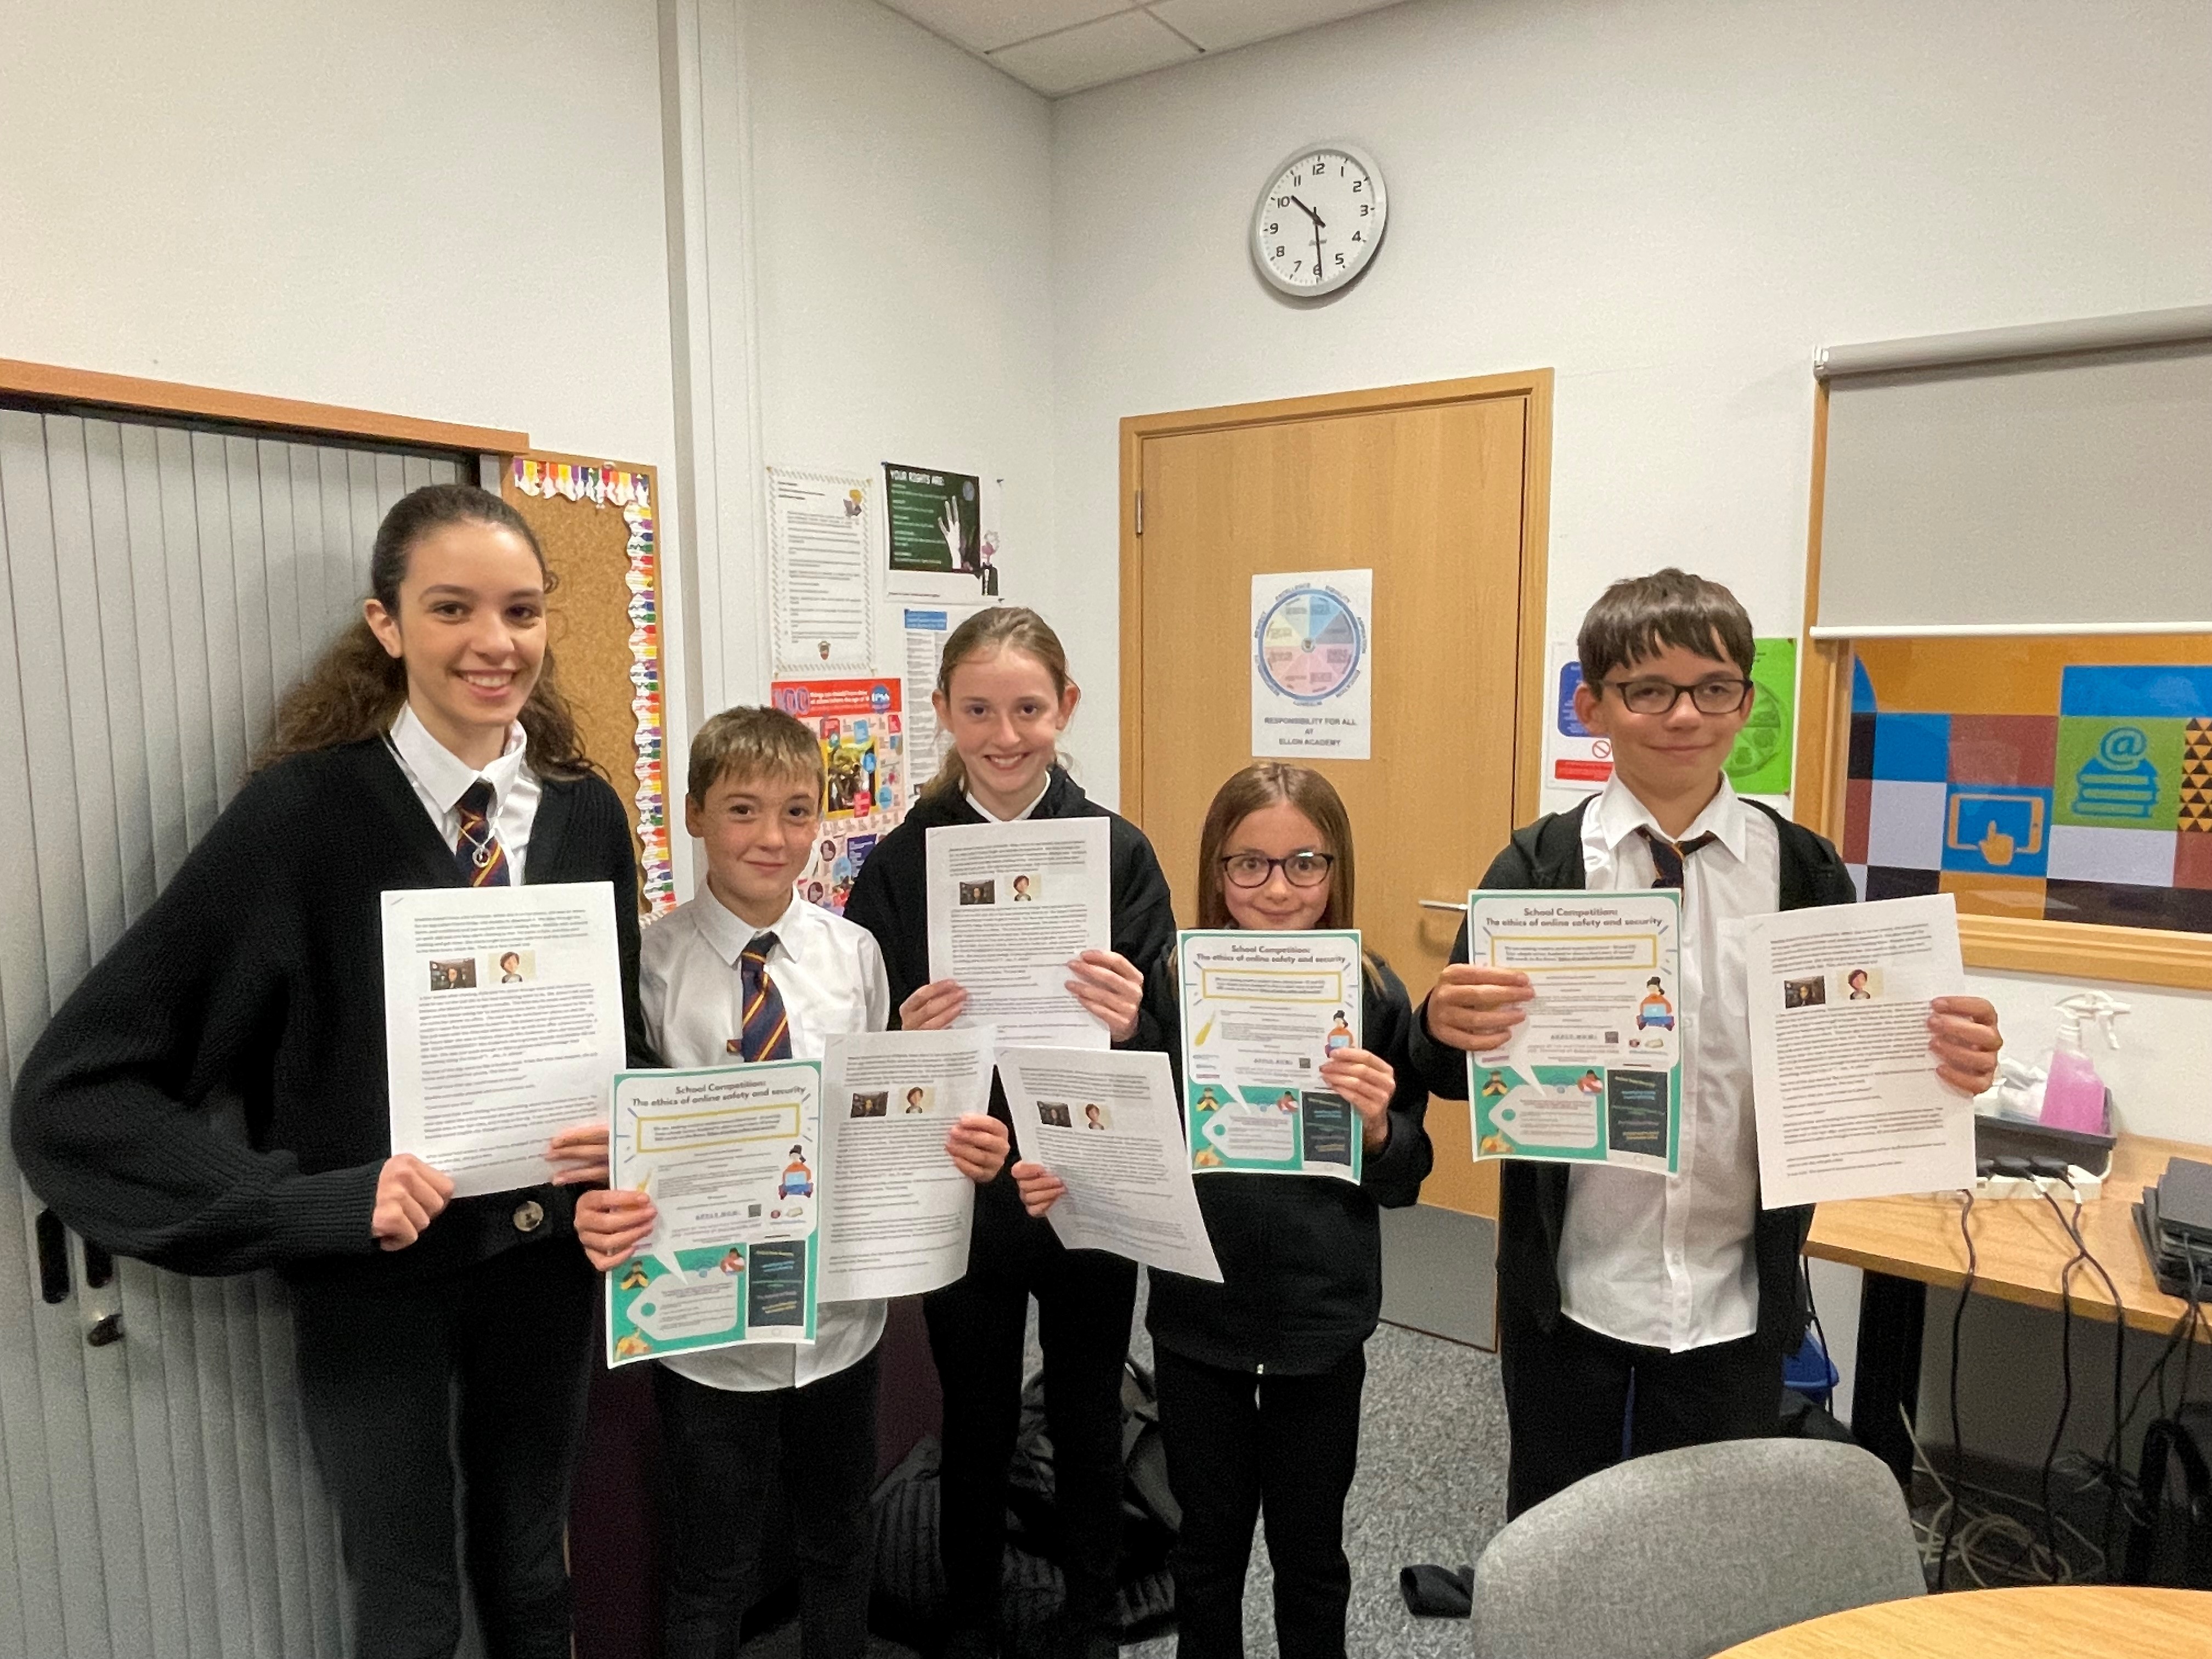 Ellon Academy Maddie-is Online story writing winners pose with stories